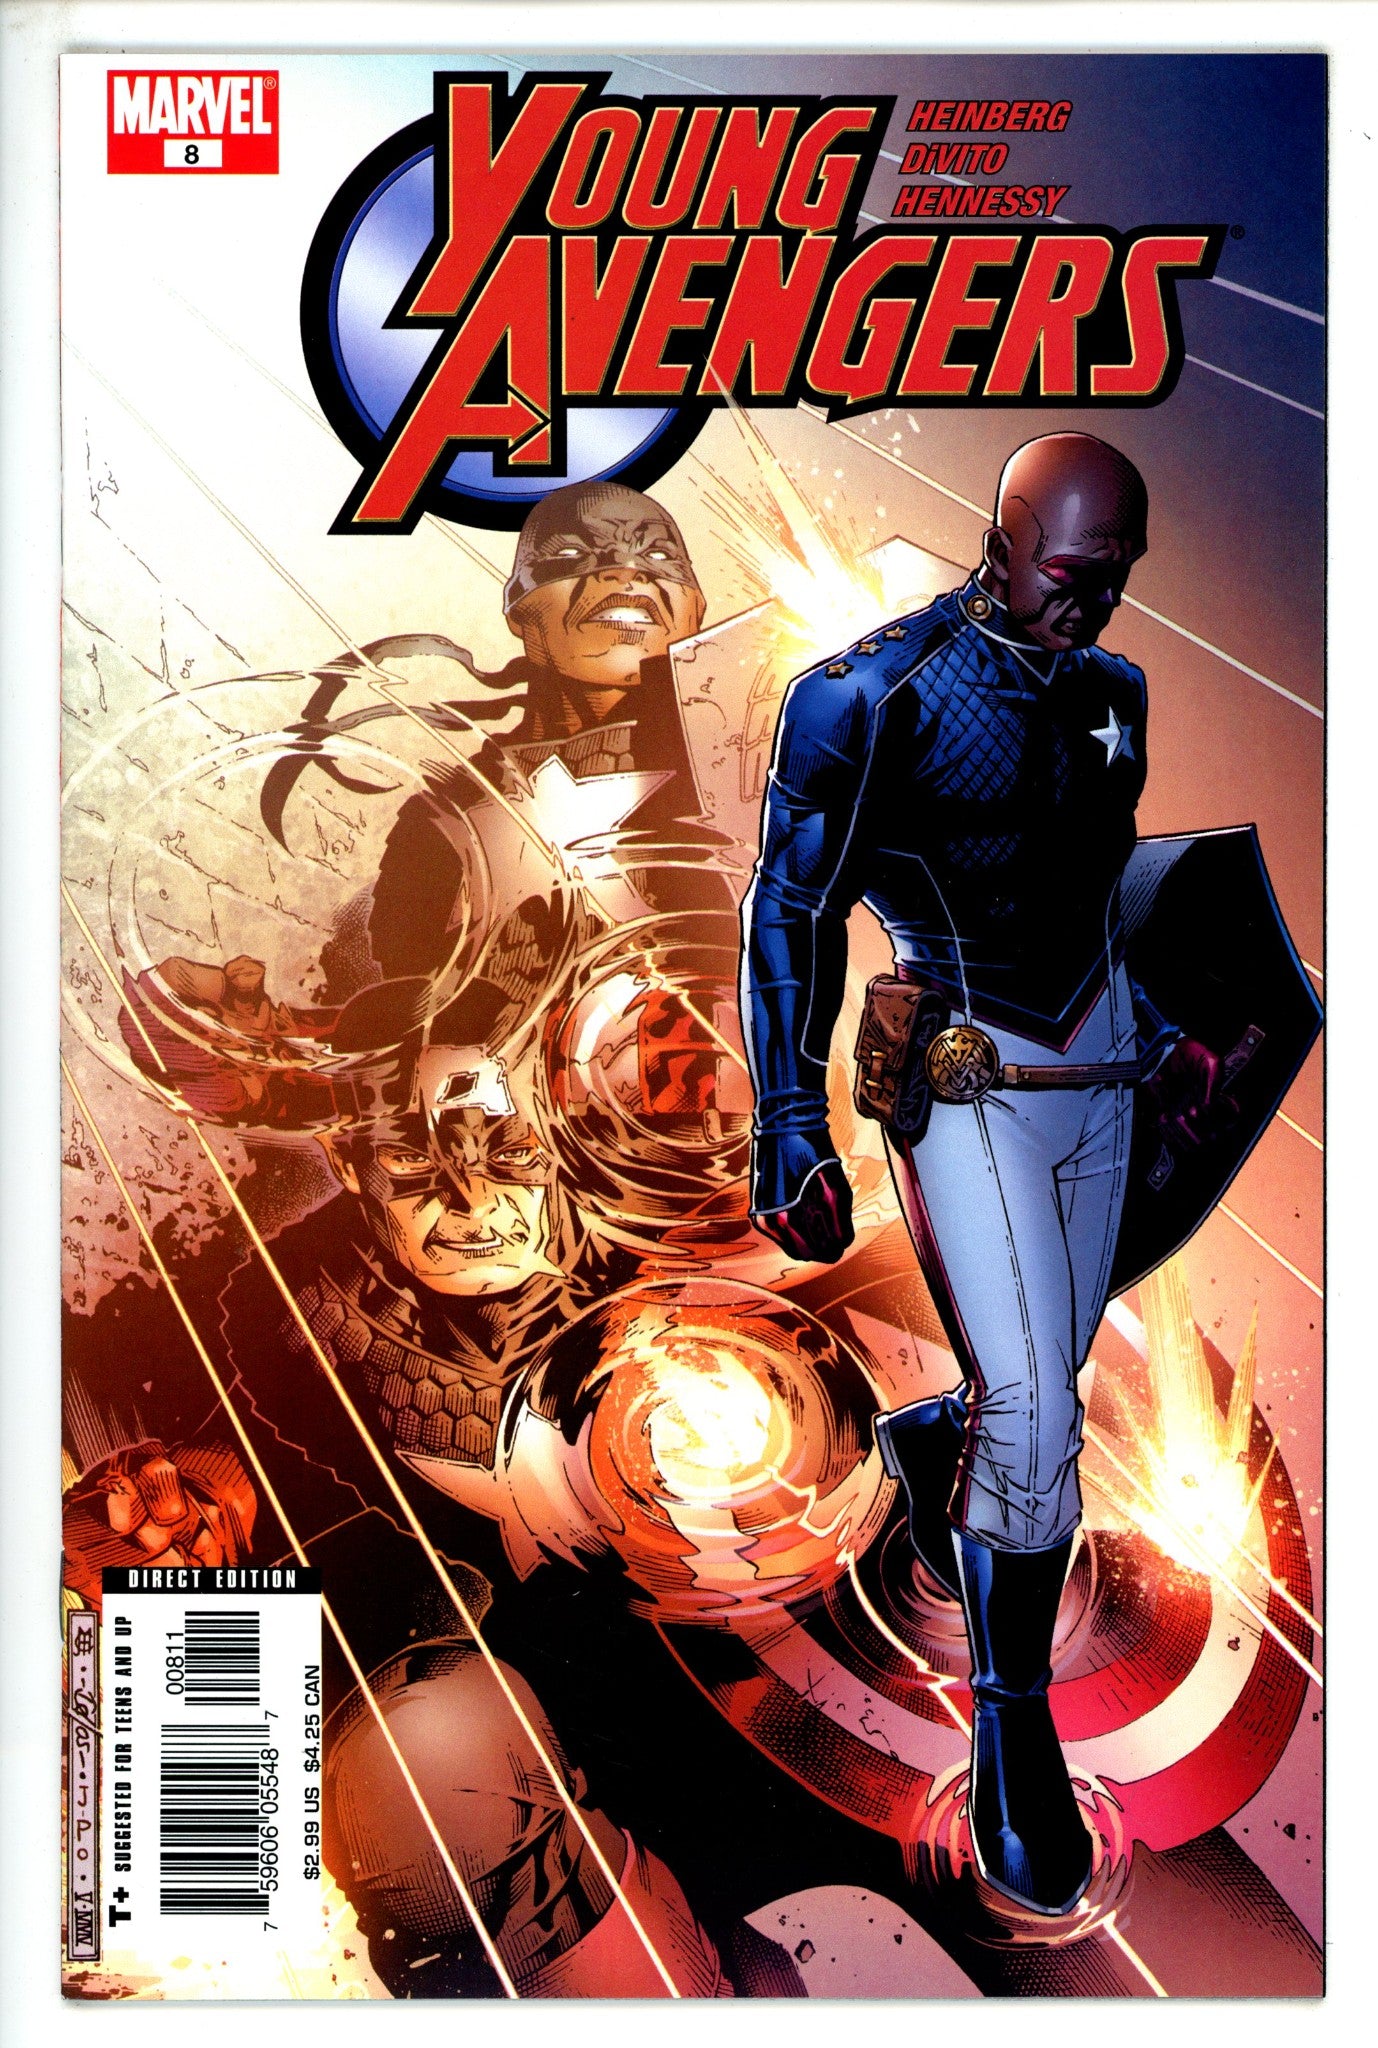 Young Avengers Vol 1 8 NM- (2005)